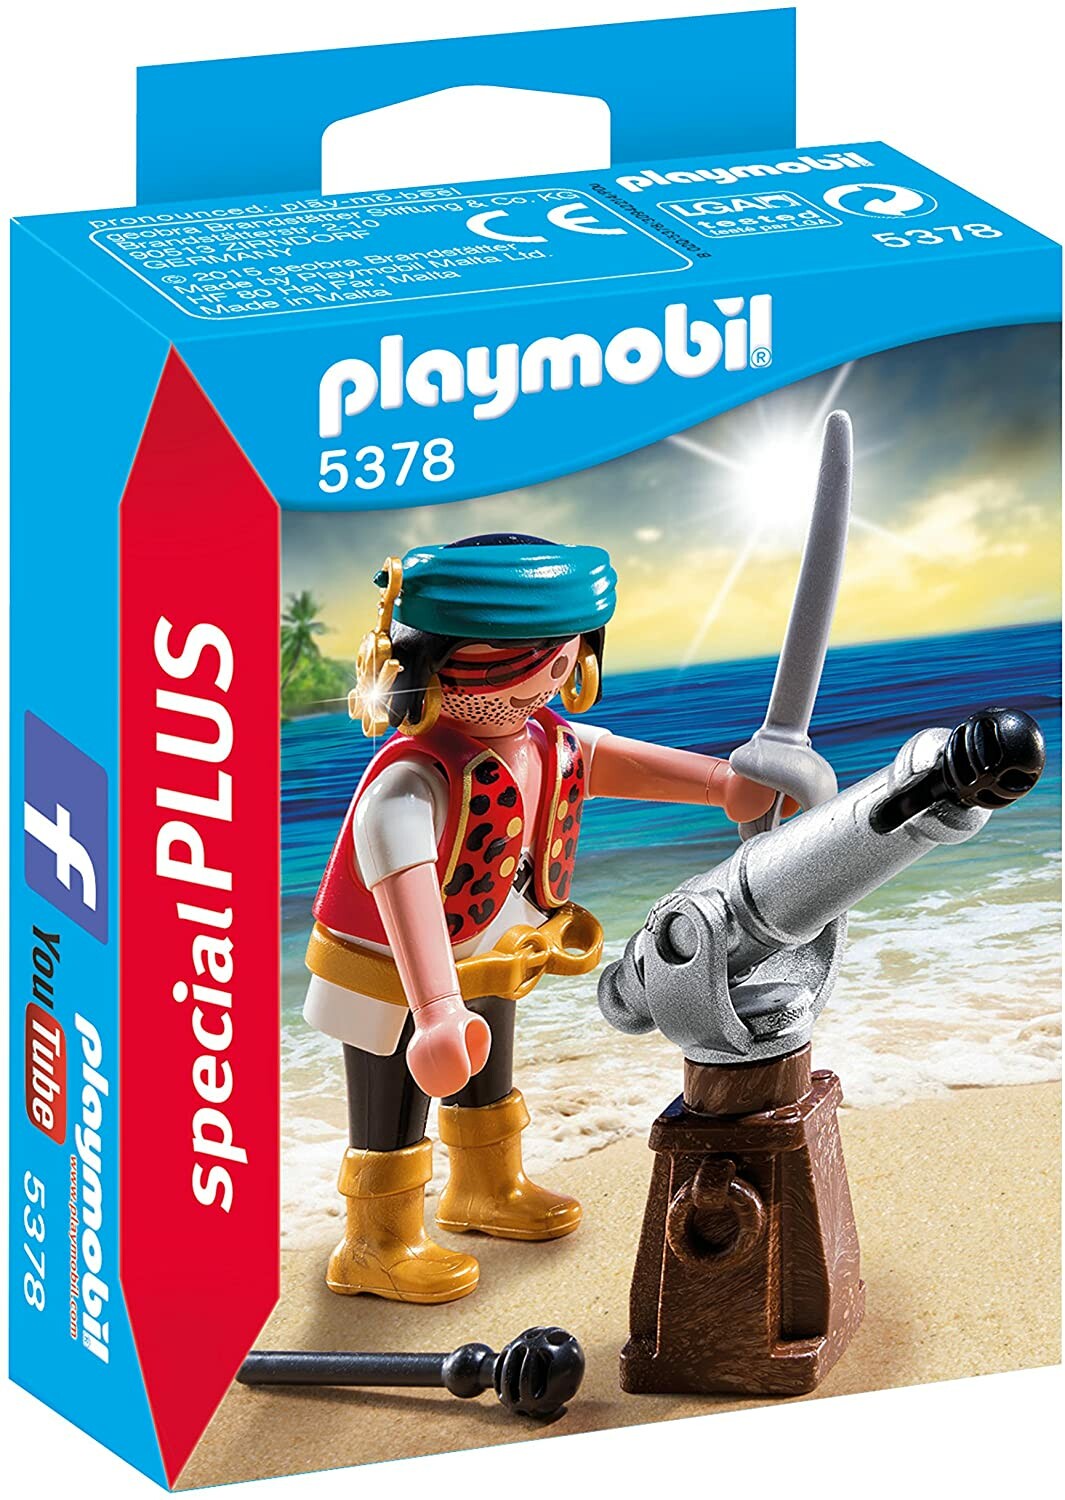 FIGURINE PERSONNAGE PIRATE AVEC BOUTEILLE